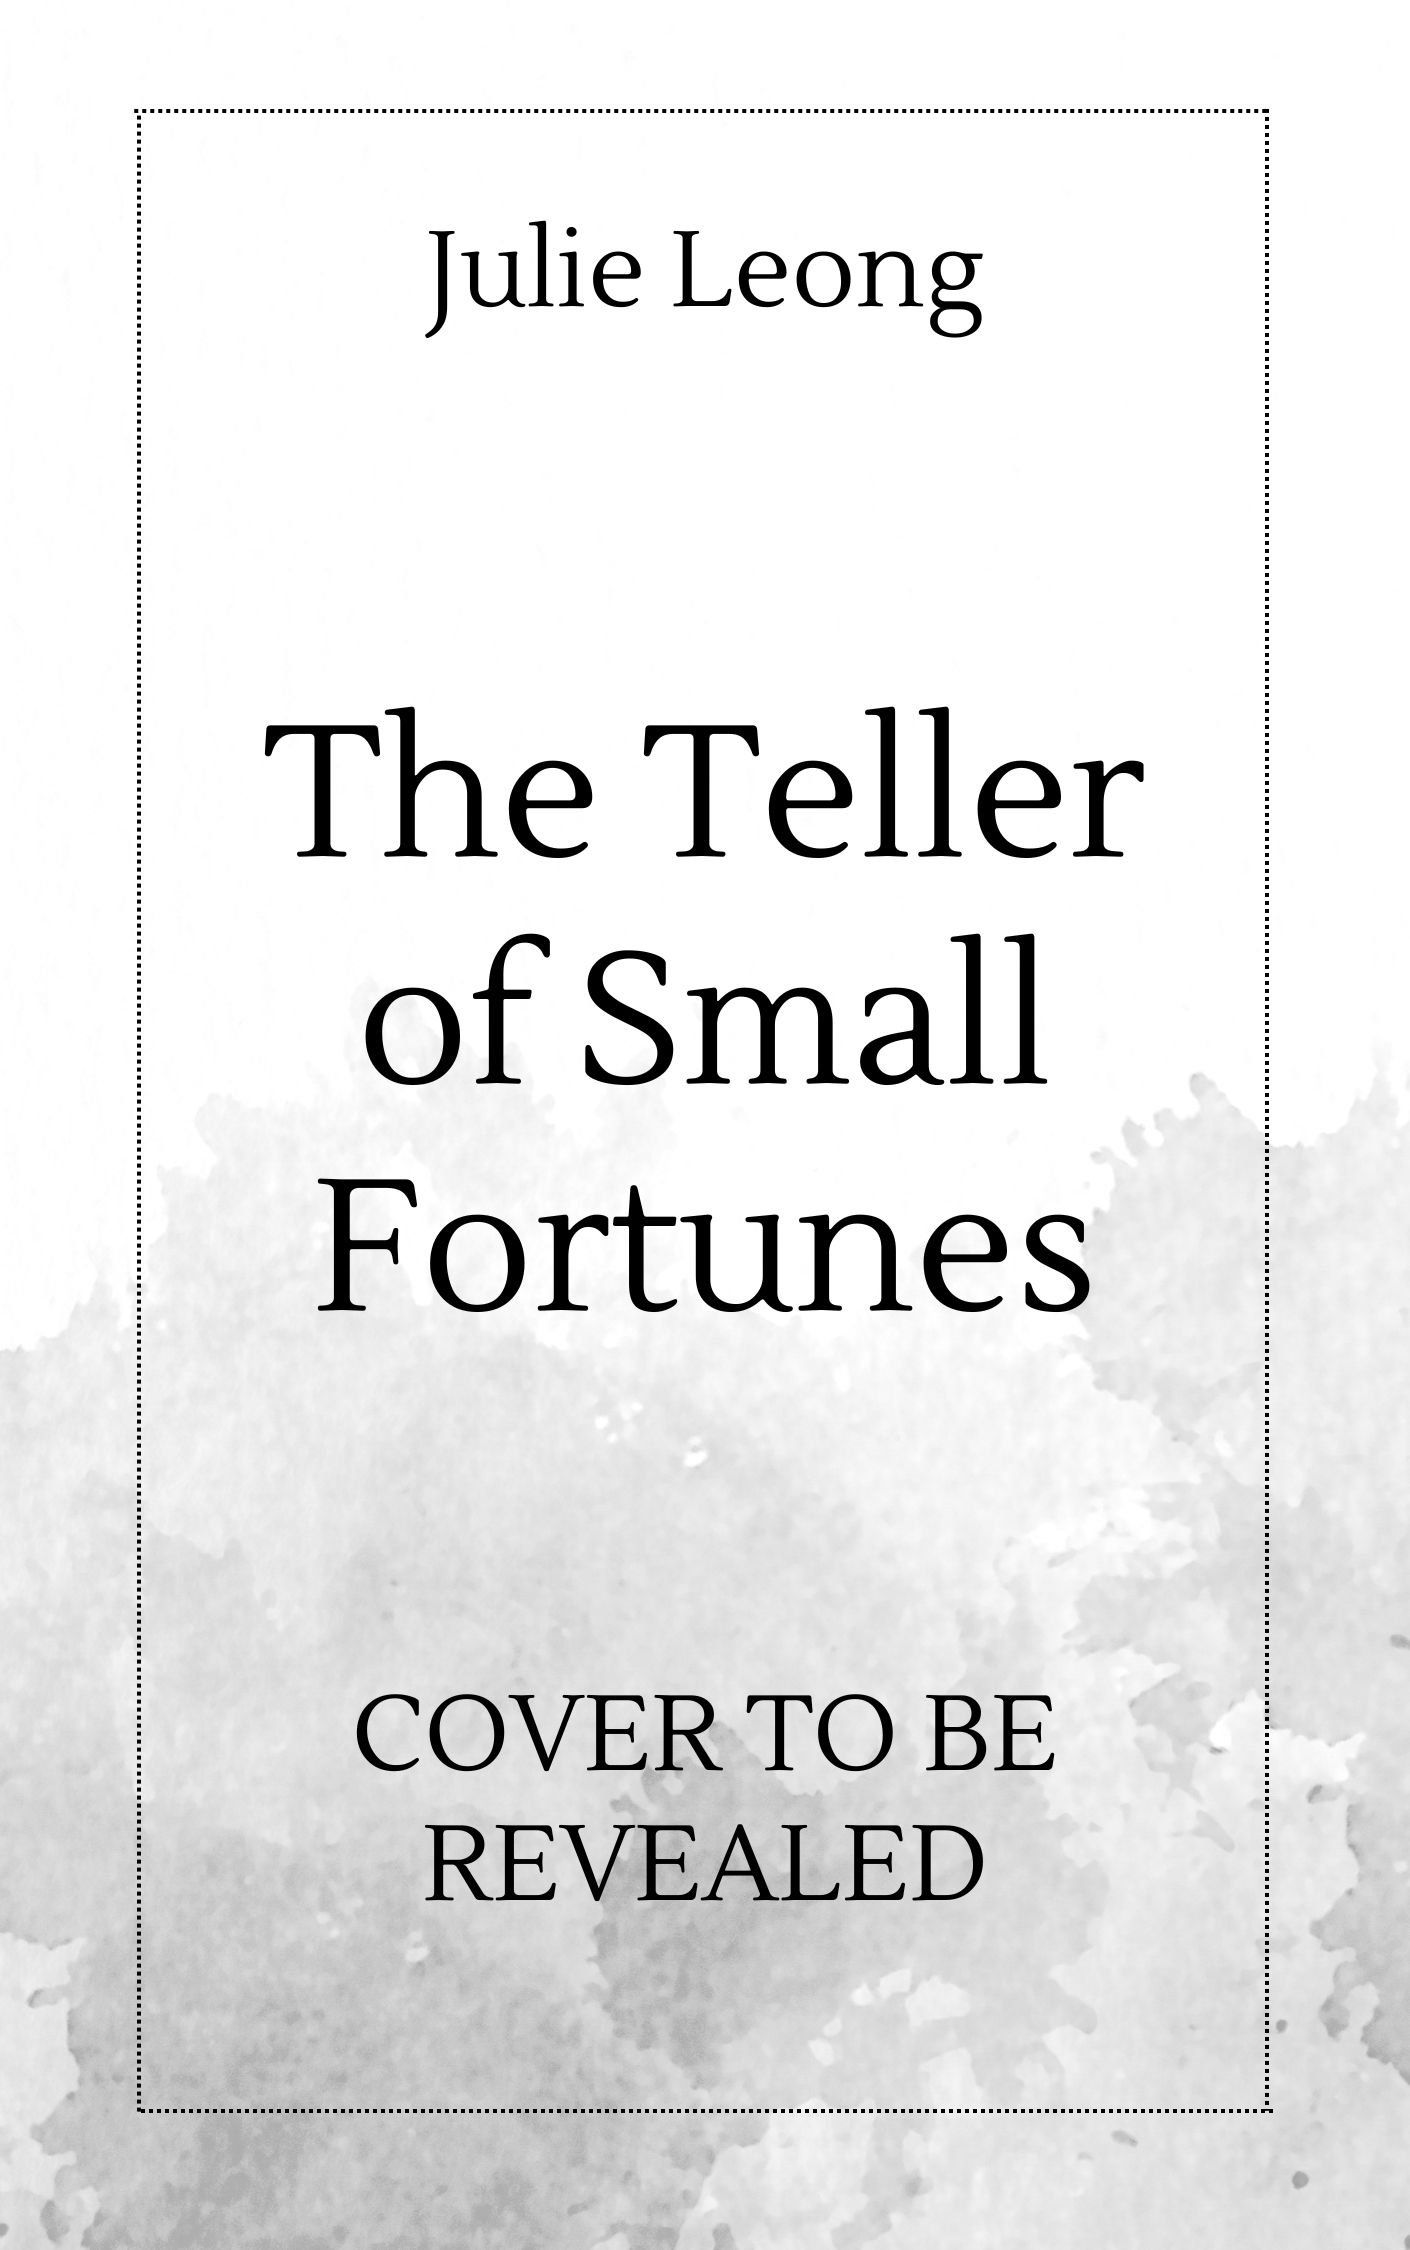 The Teller of Small Fortunes book cover